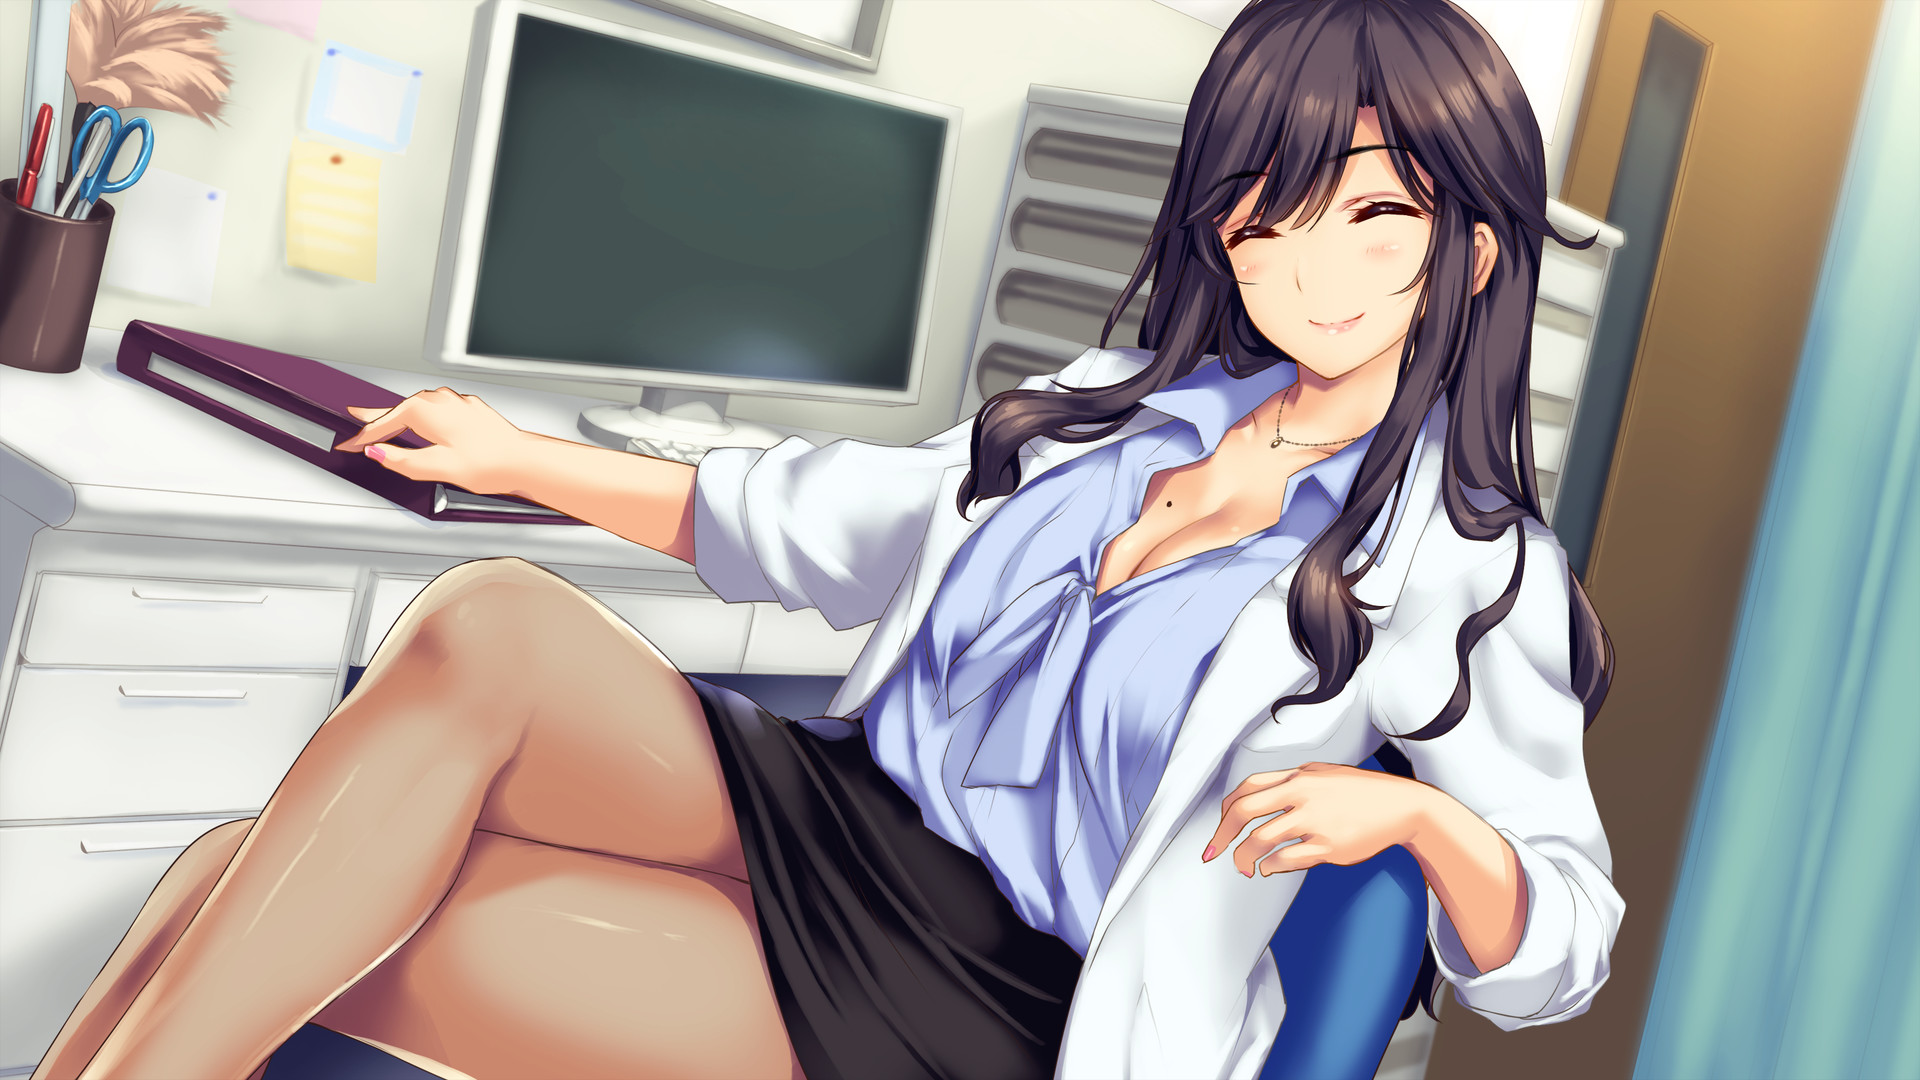 The medical examination diary: the exciting days of me and my senpai